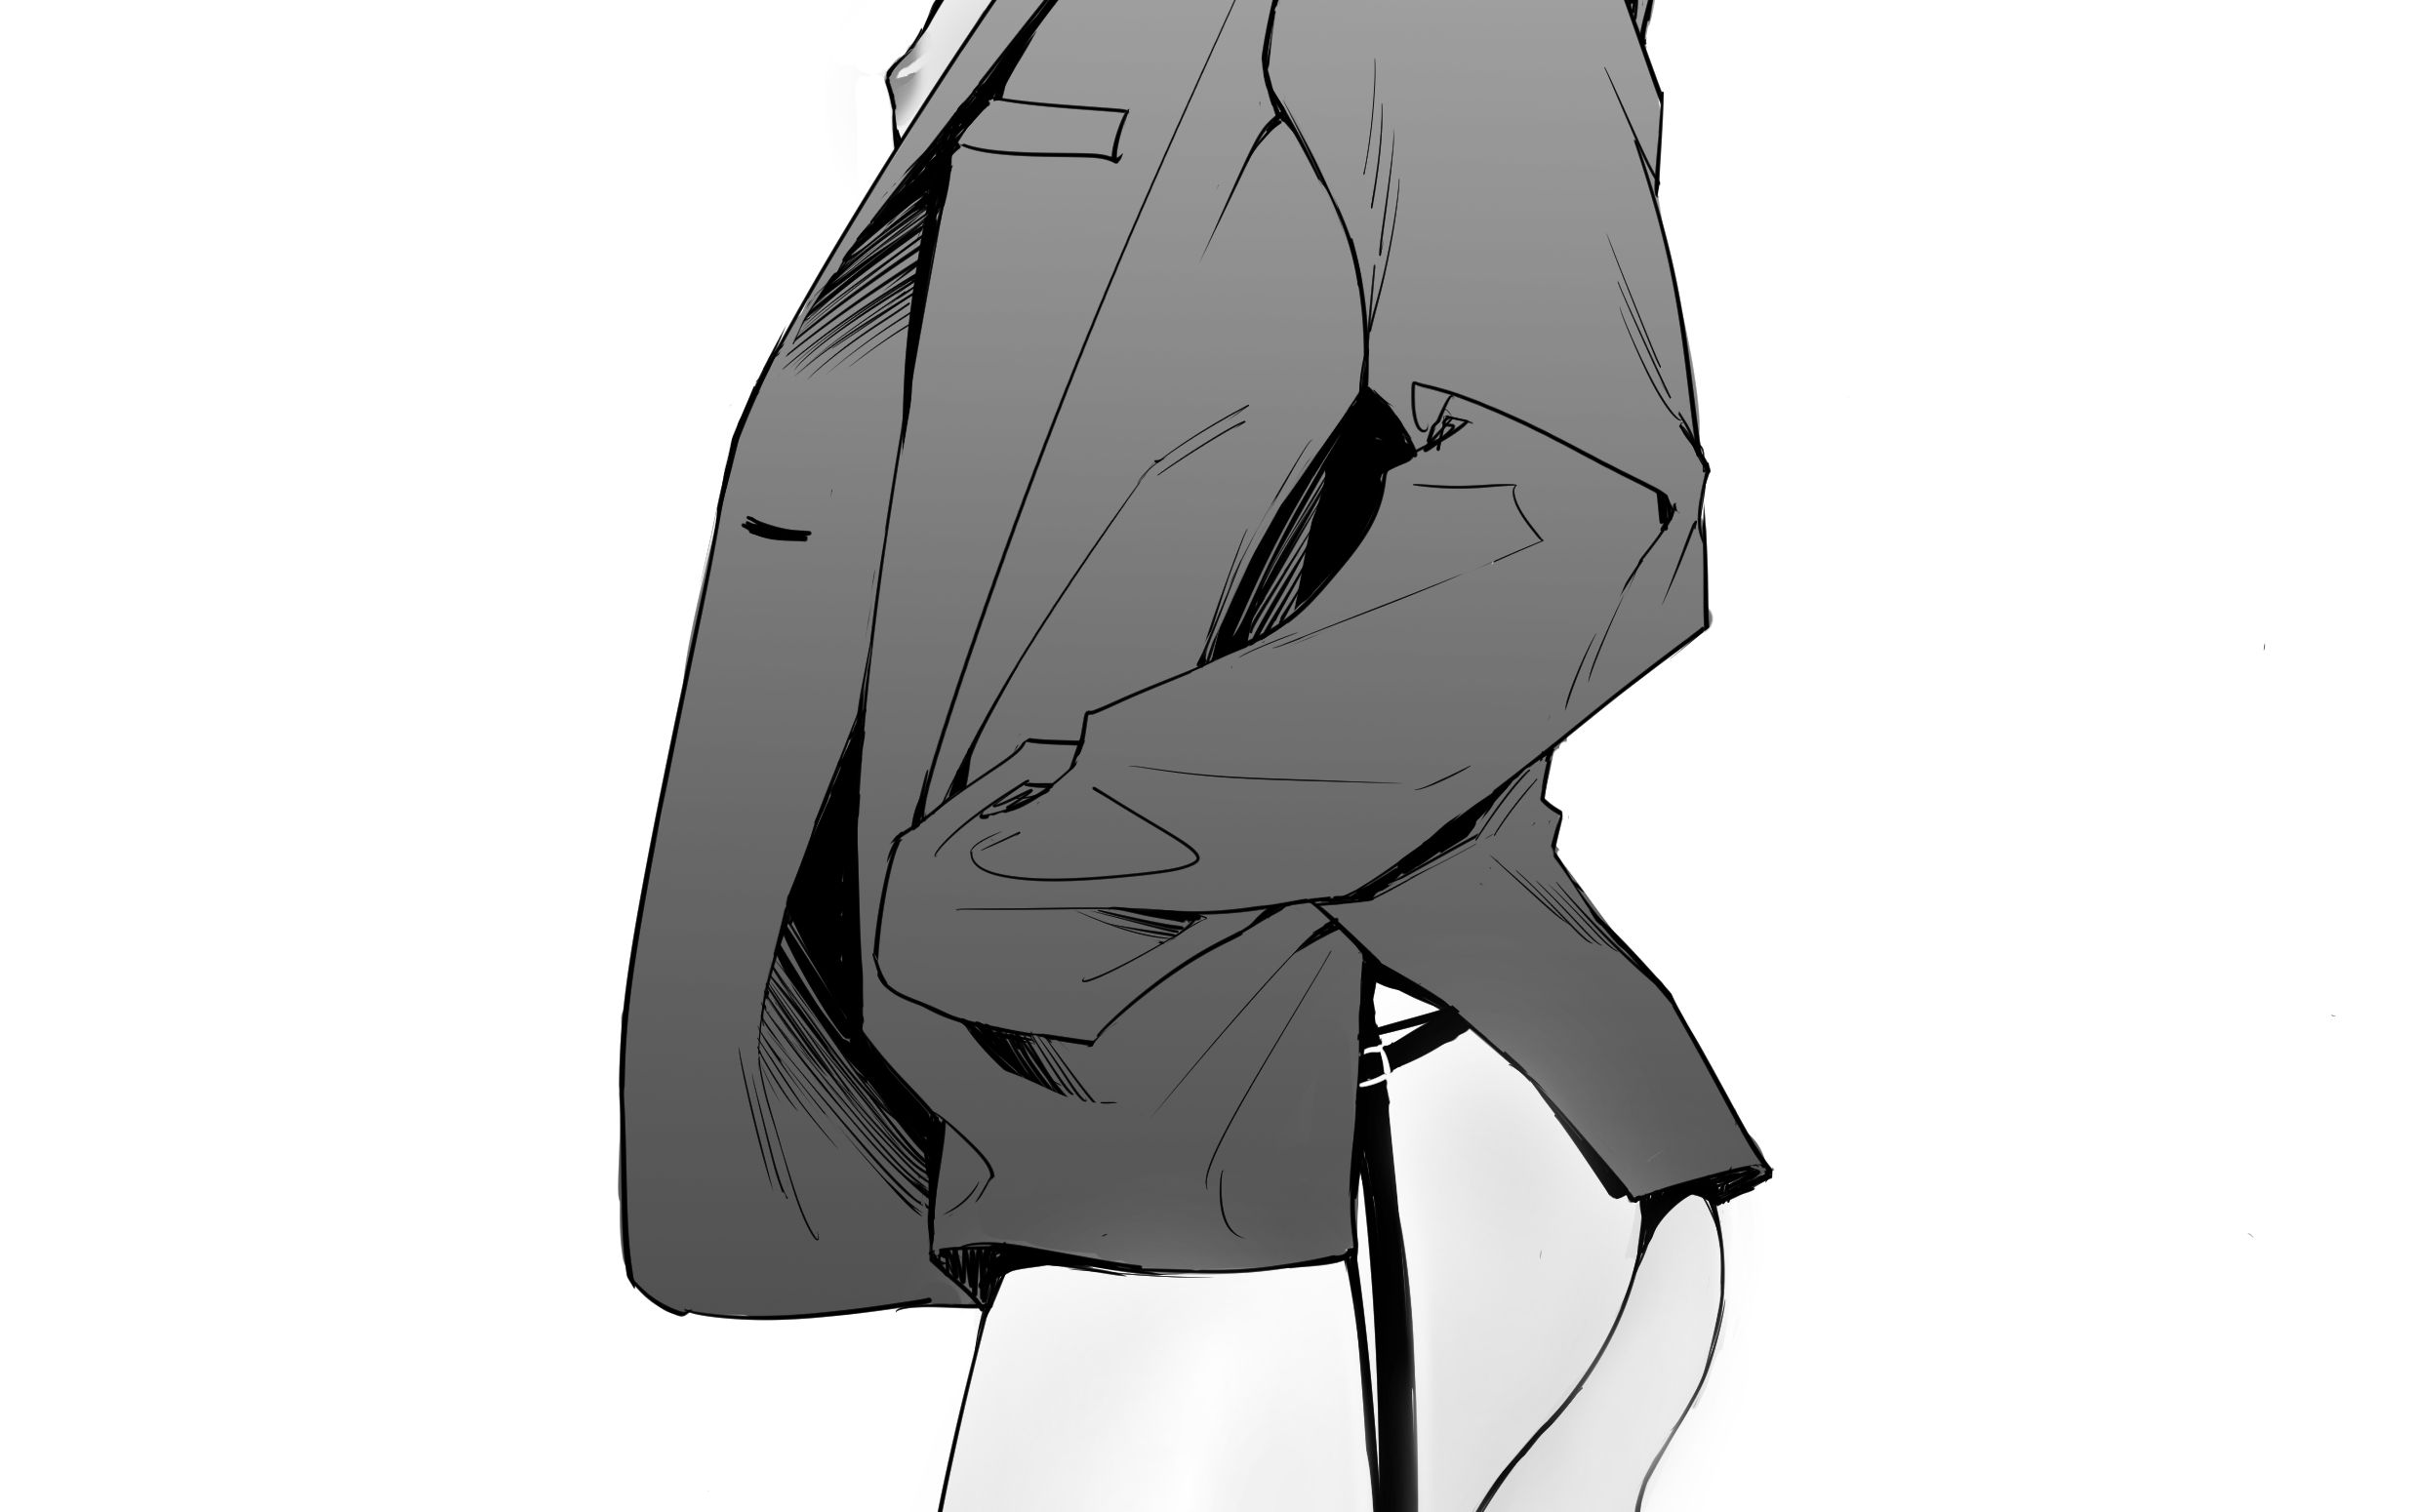 anime guy in suit drawing